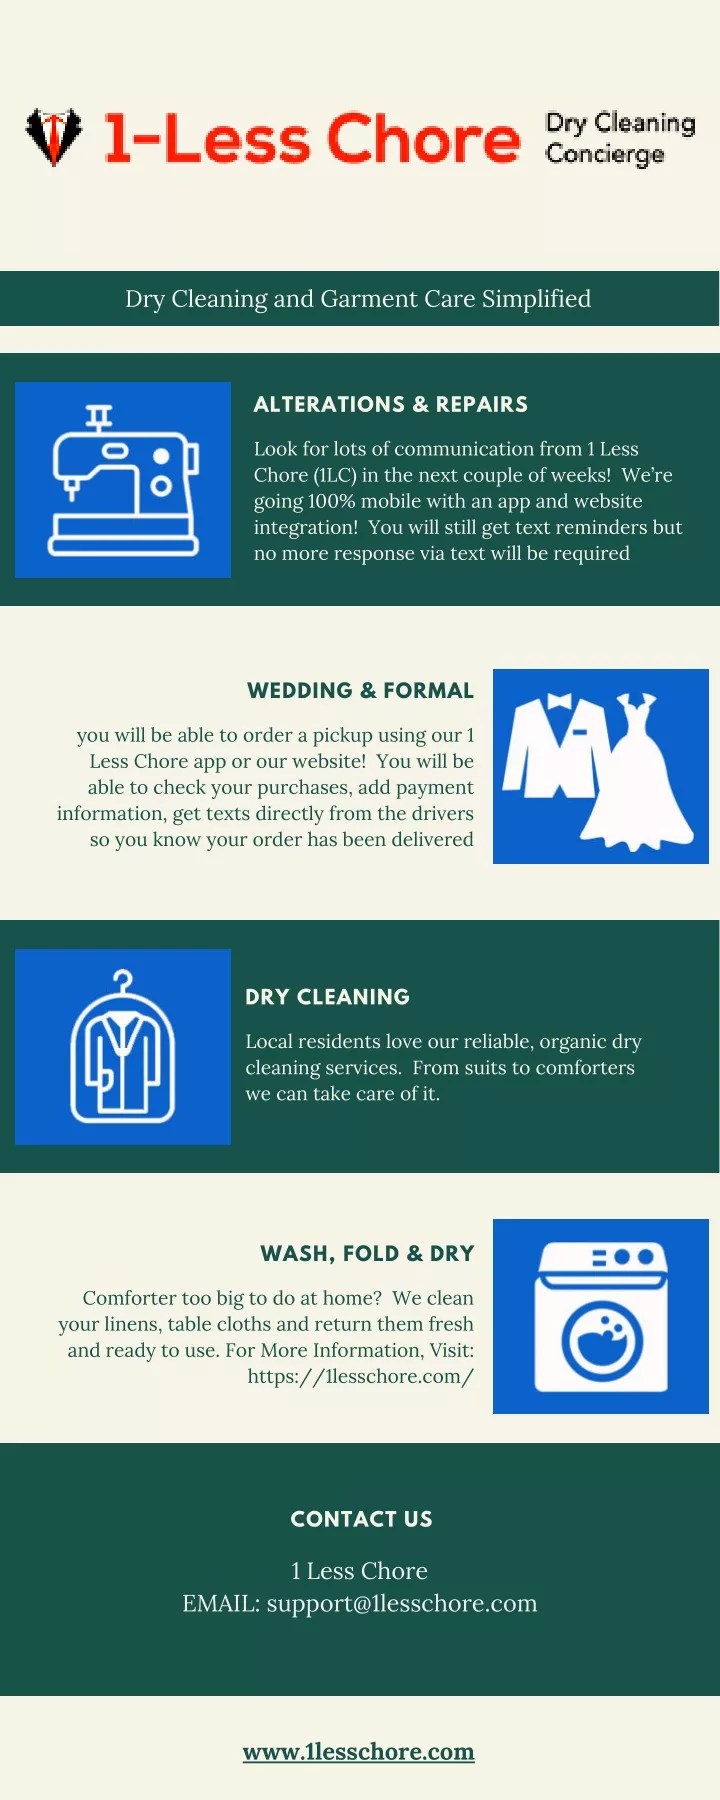 dry cleaning and garment care simplified